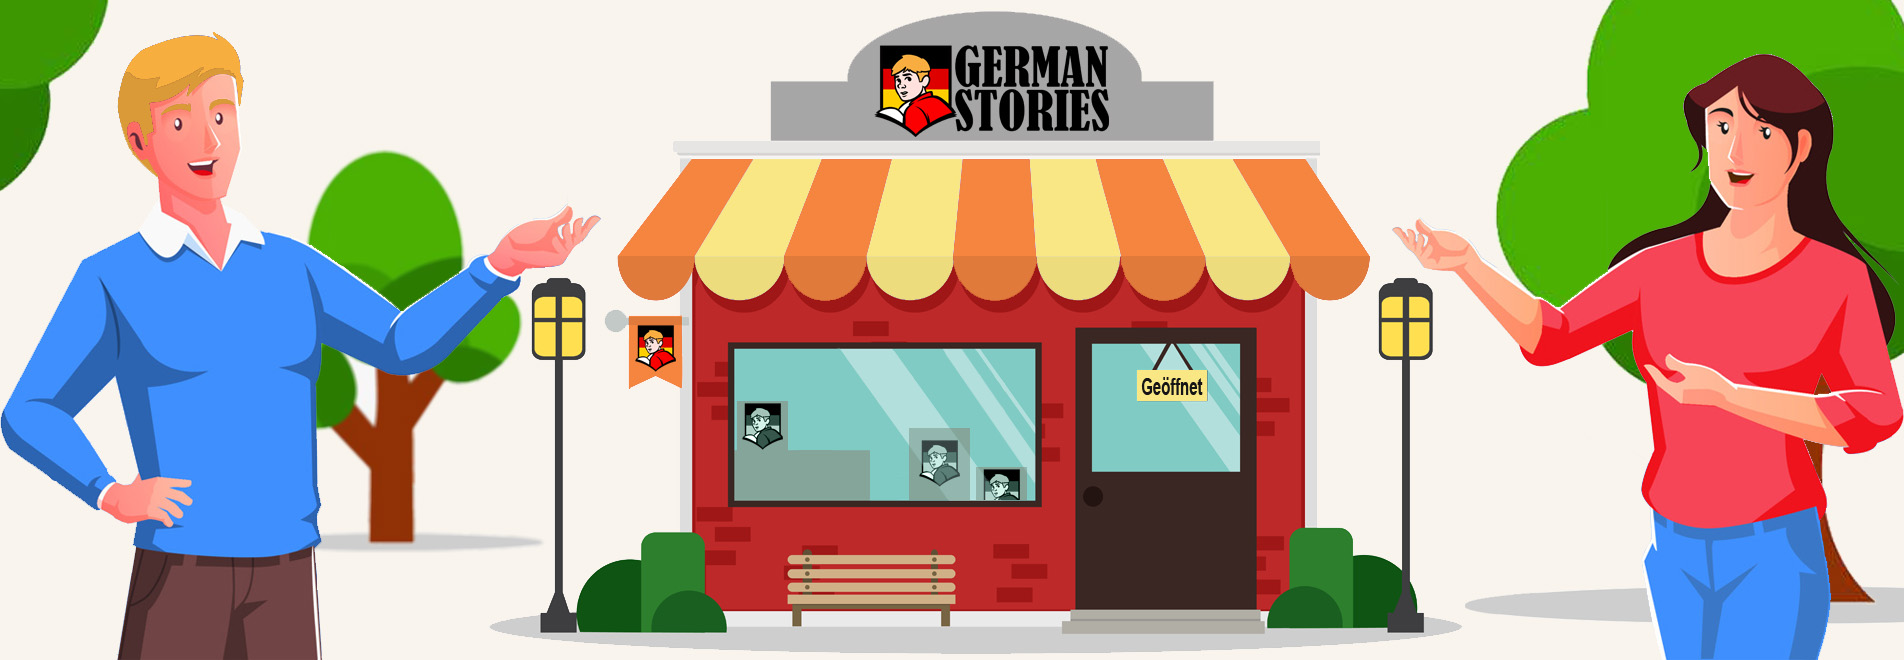 Get a German Stories membership: Try beginner worksheets, online lessons, flashcards, transcripts, vocabulary and grammar exercises for free!